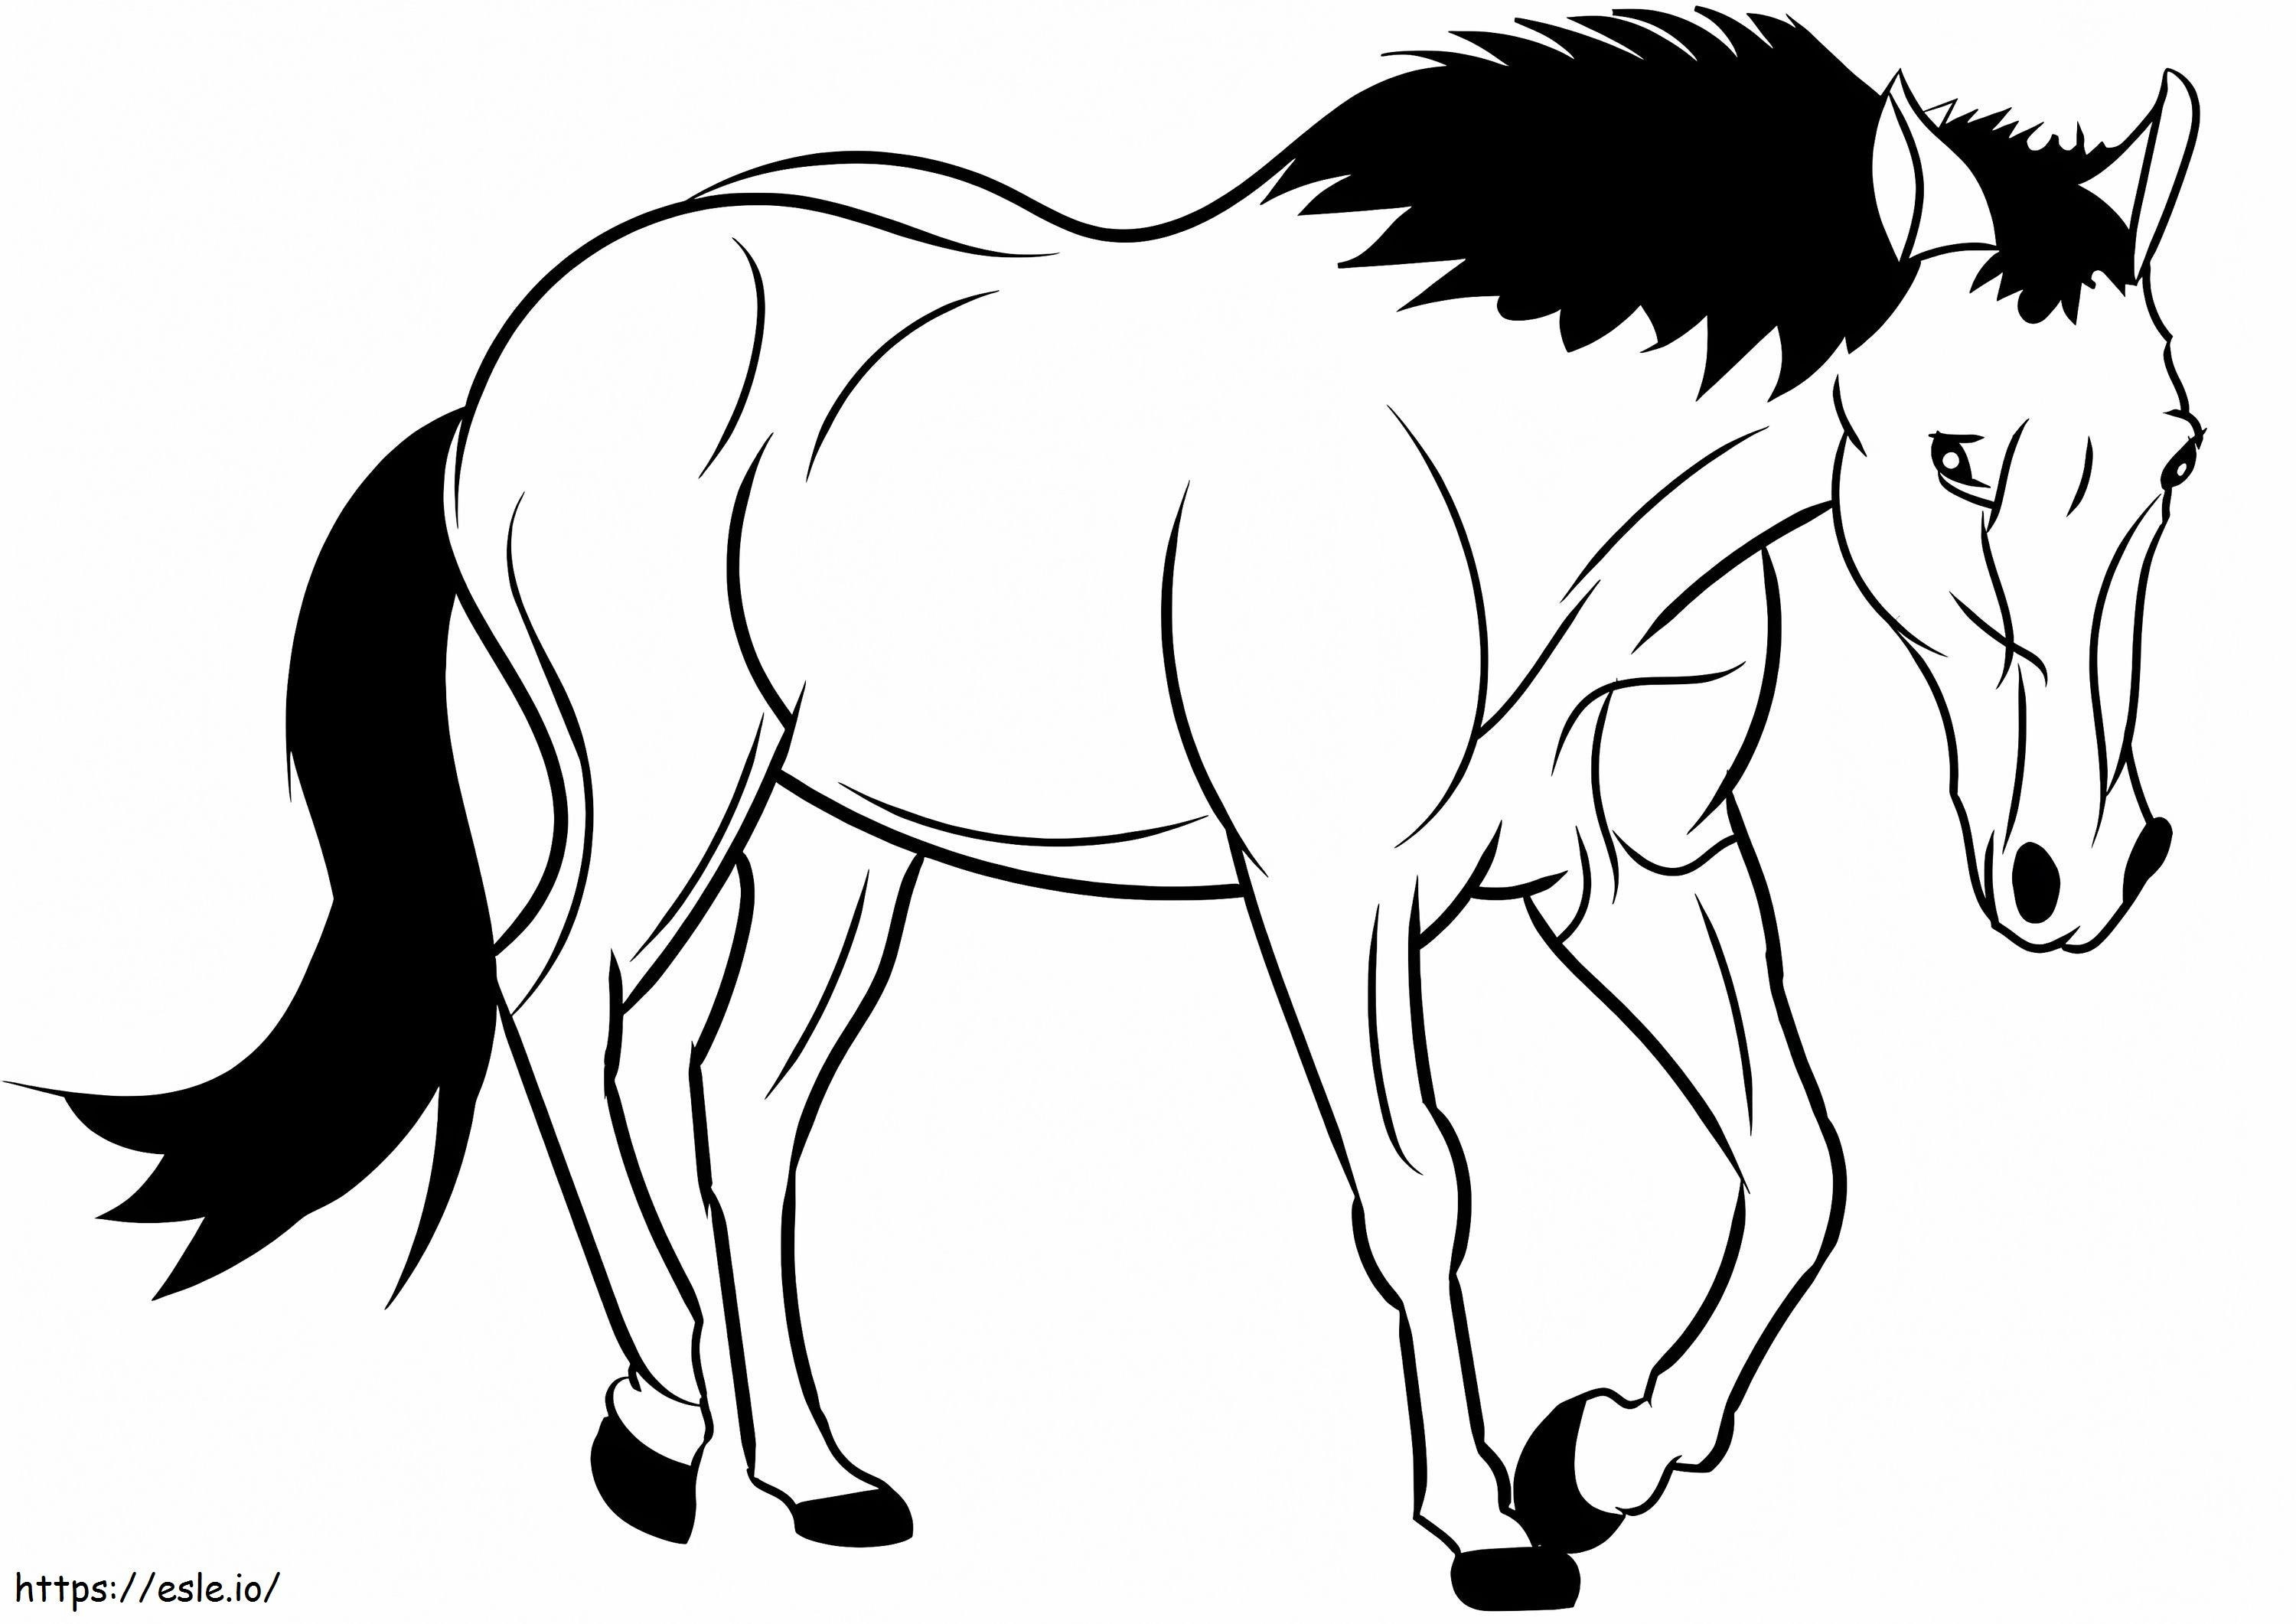 Strong Horses coloring page